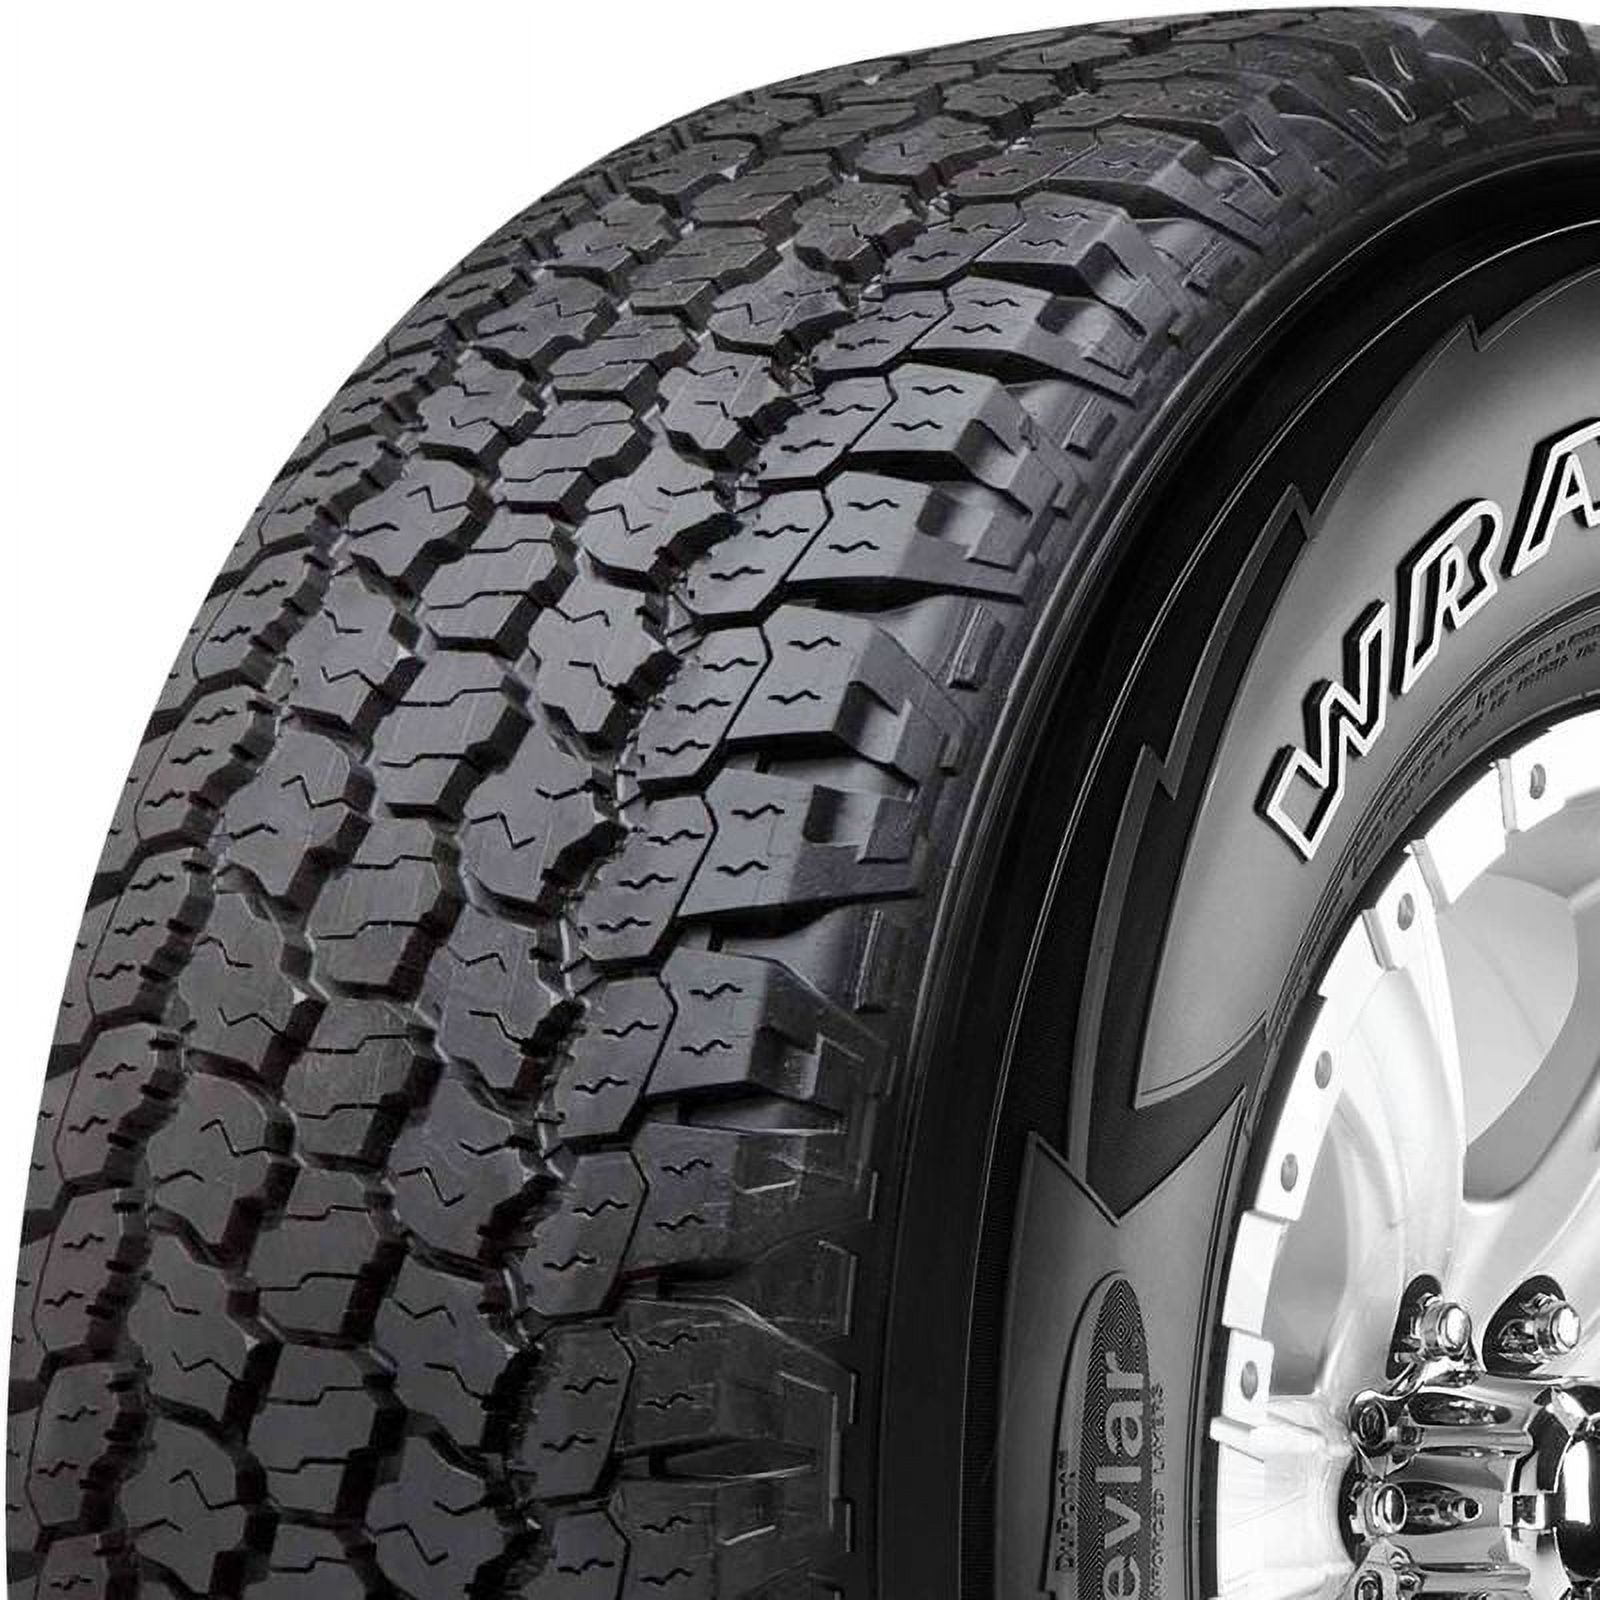 Goodyear Wrangler All-Terrain Adventure with Kevlar 265/70R16 112 T Tire - image 2 of 3